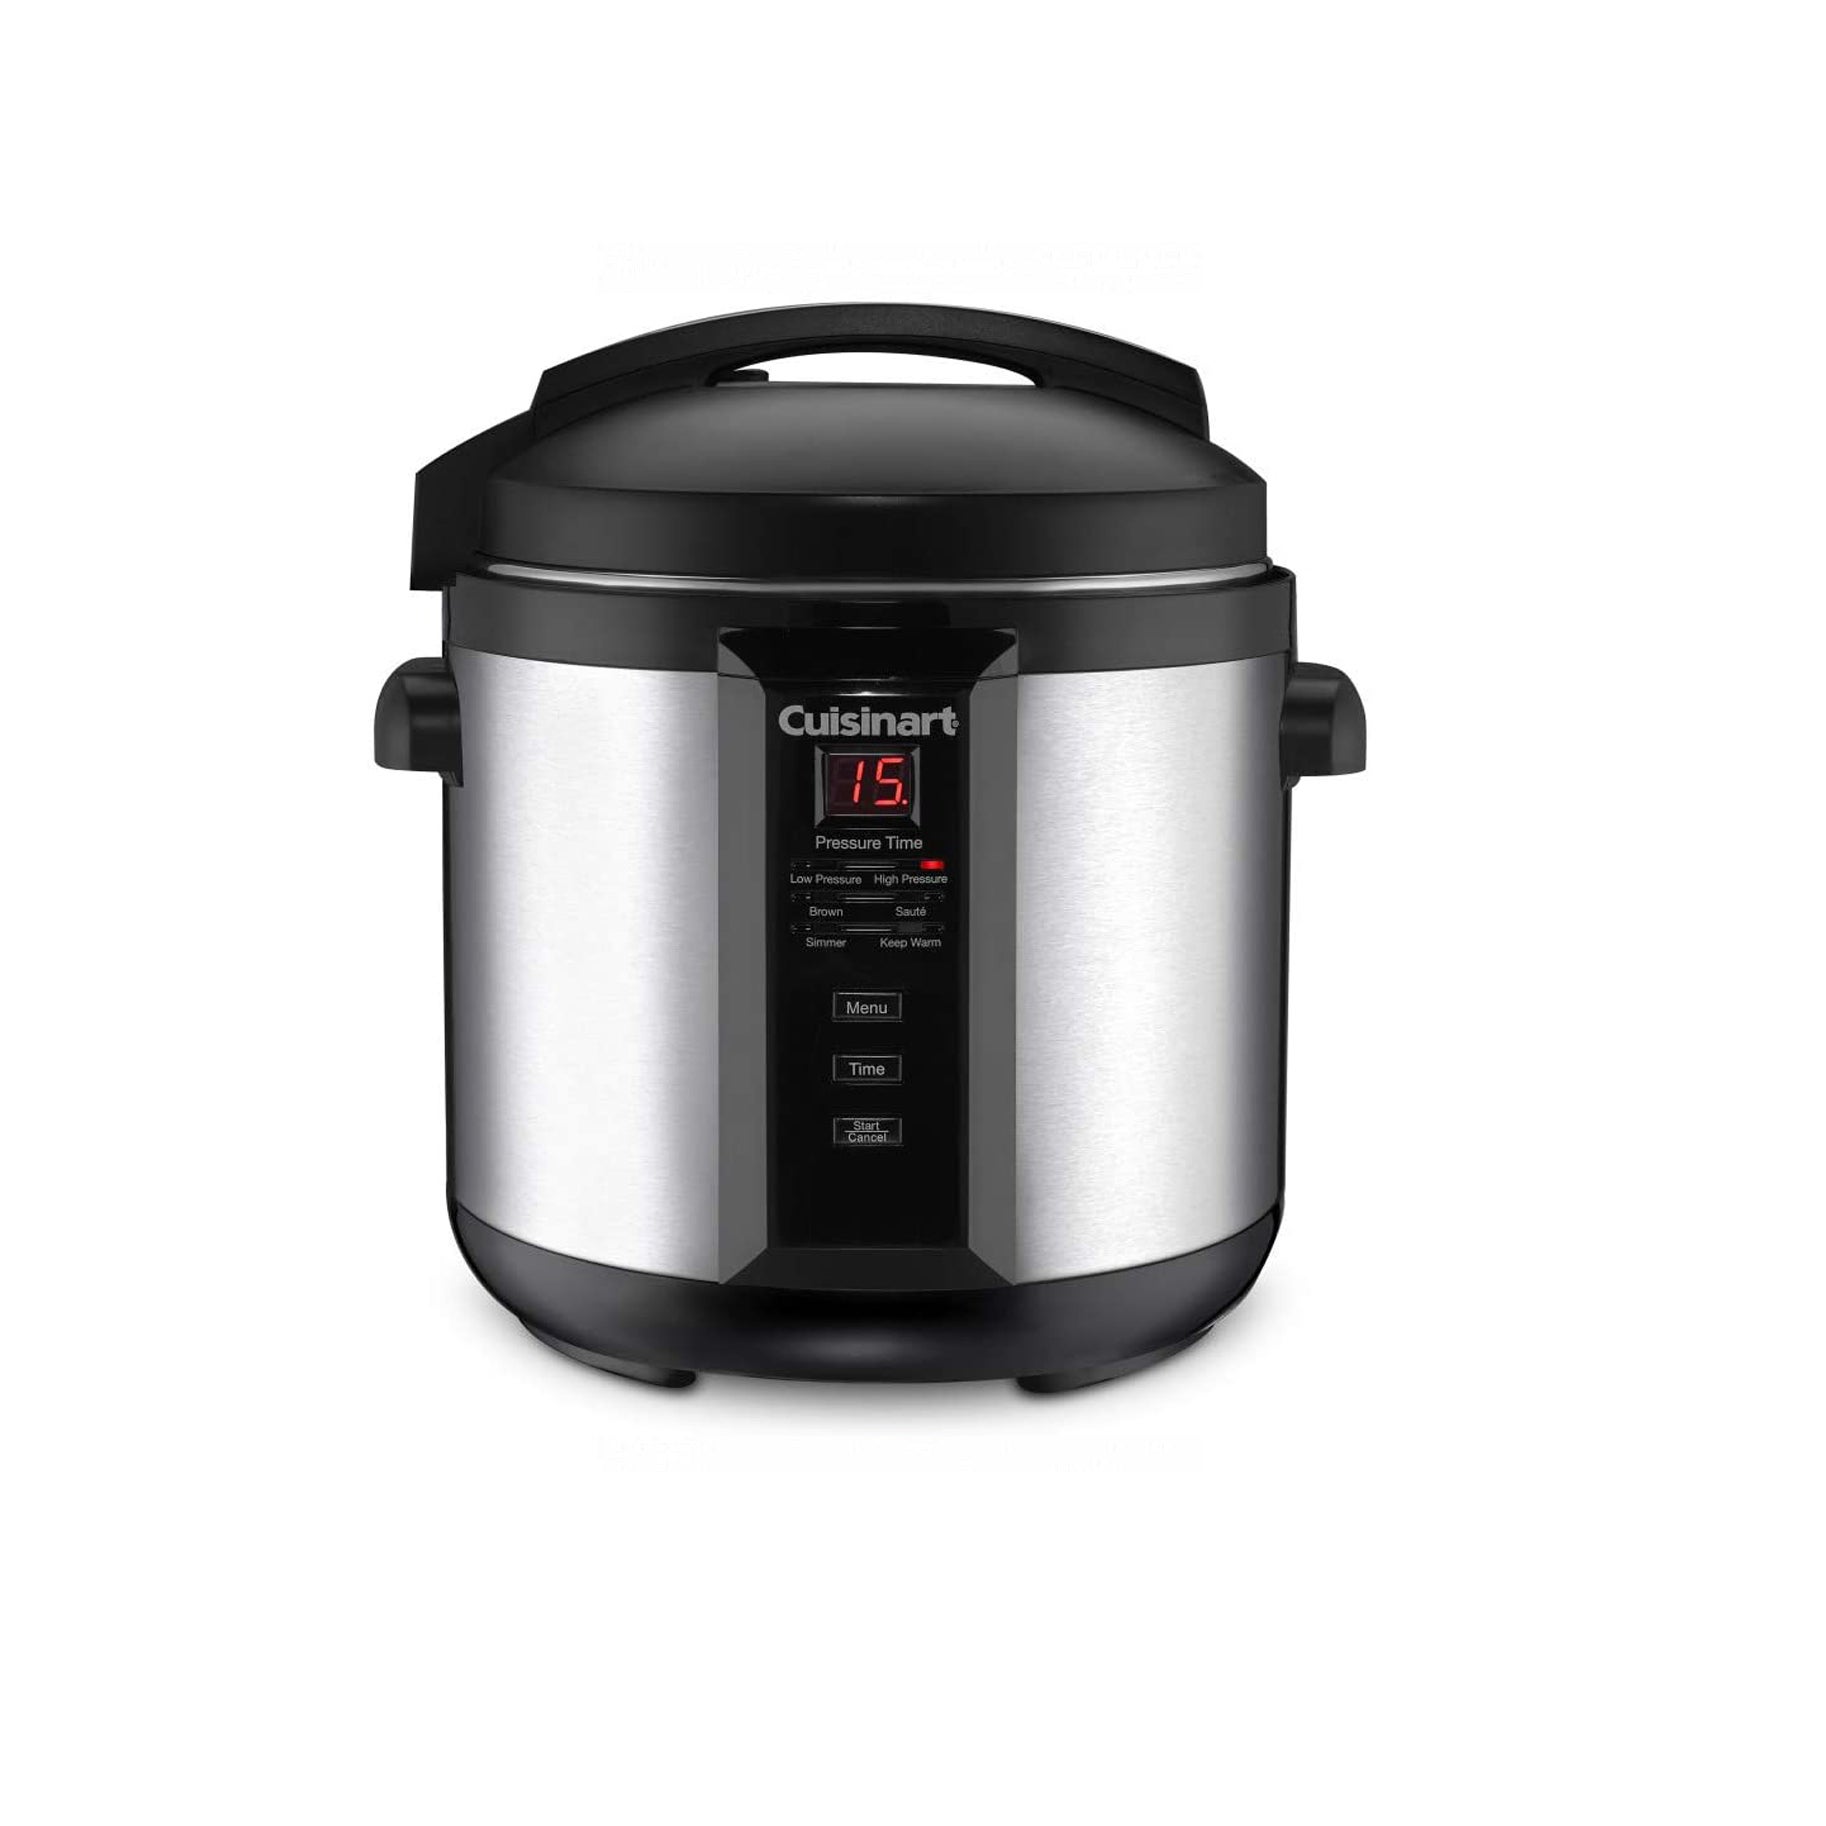 5 Best Electric Pressure Cookers That Make Cooking Easy - Guiding Tech